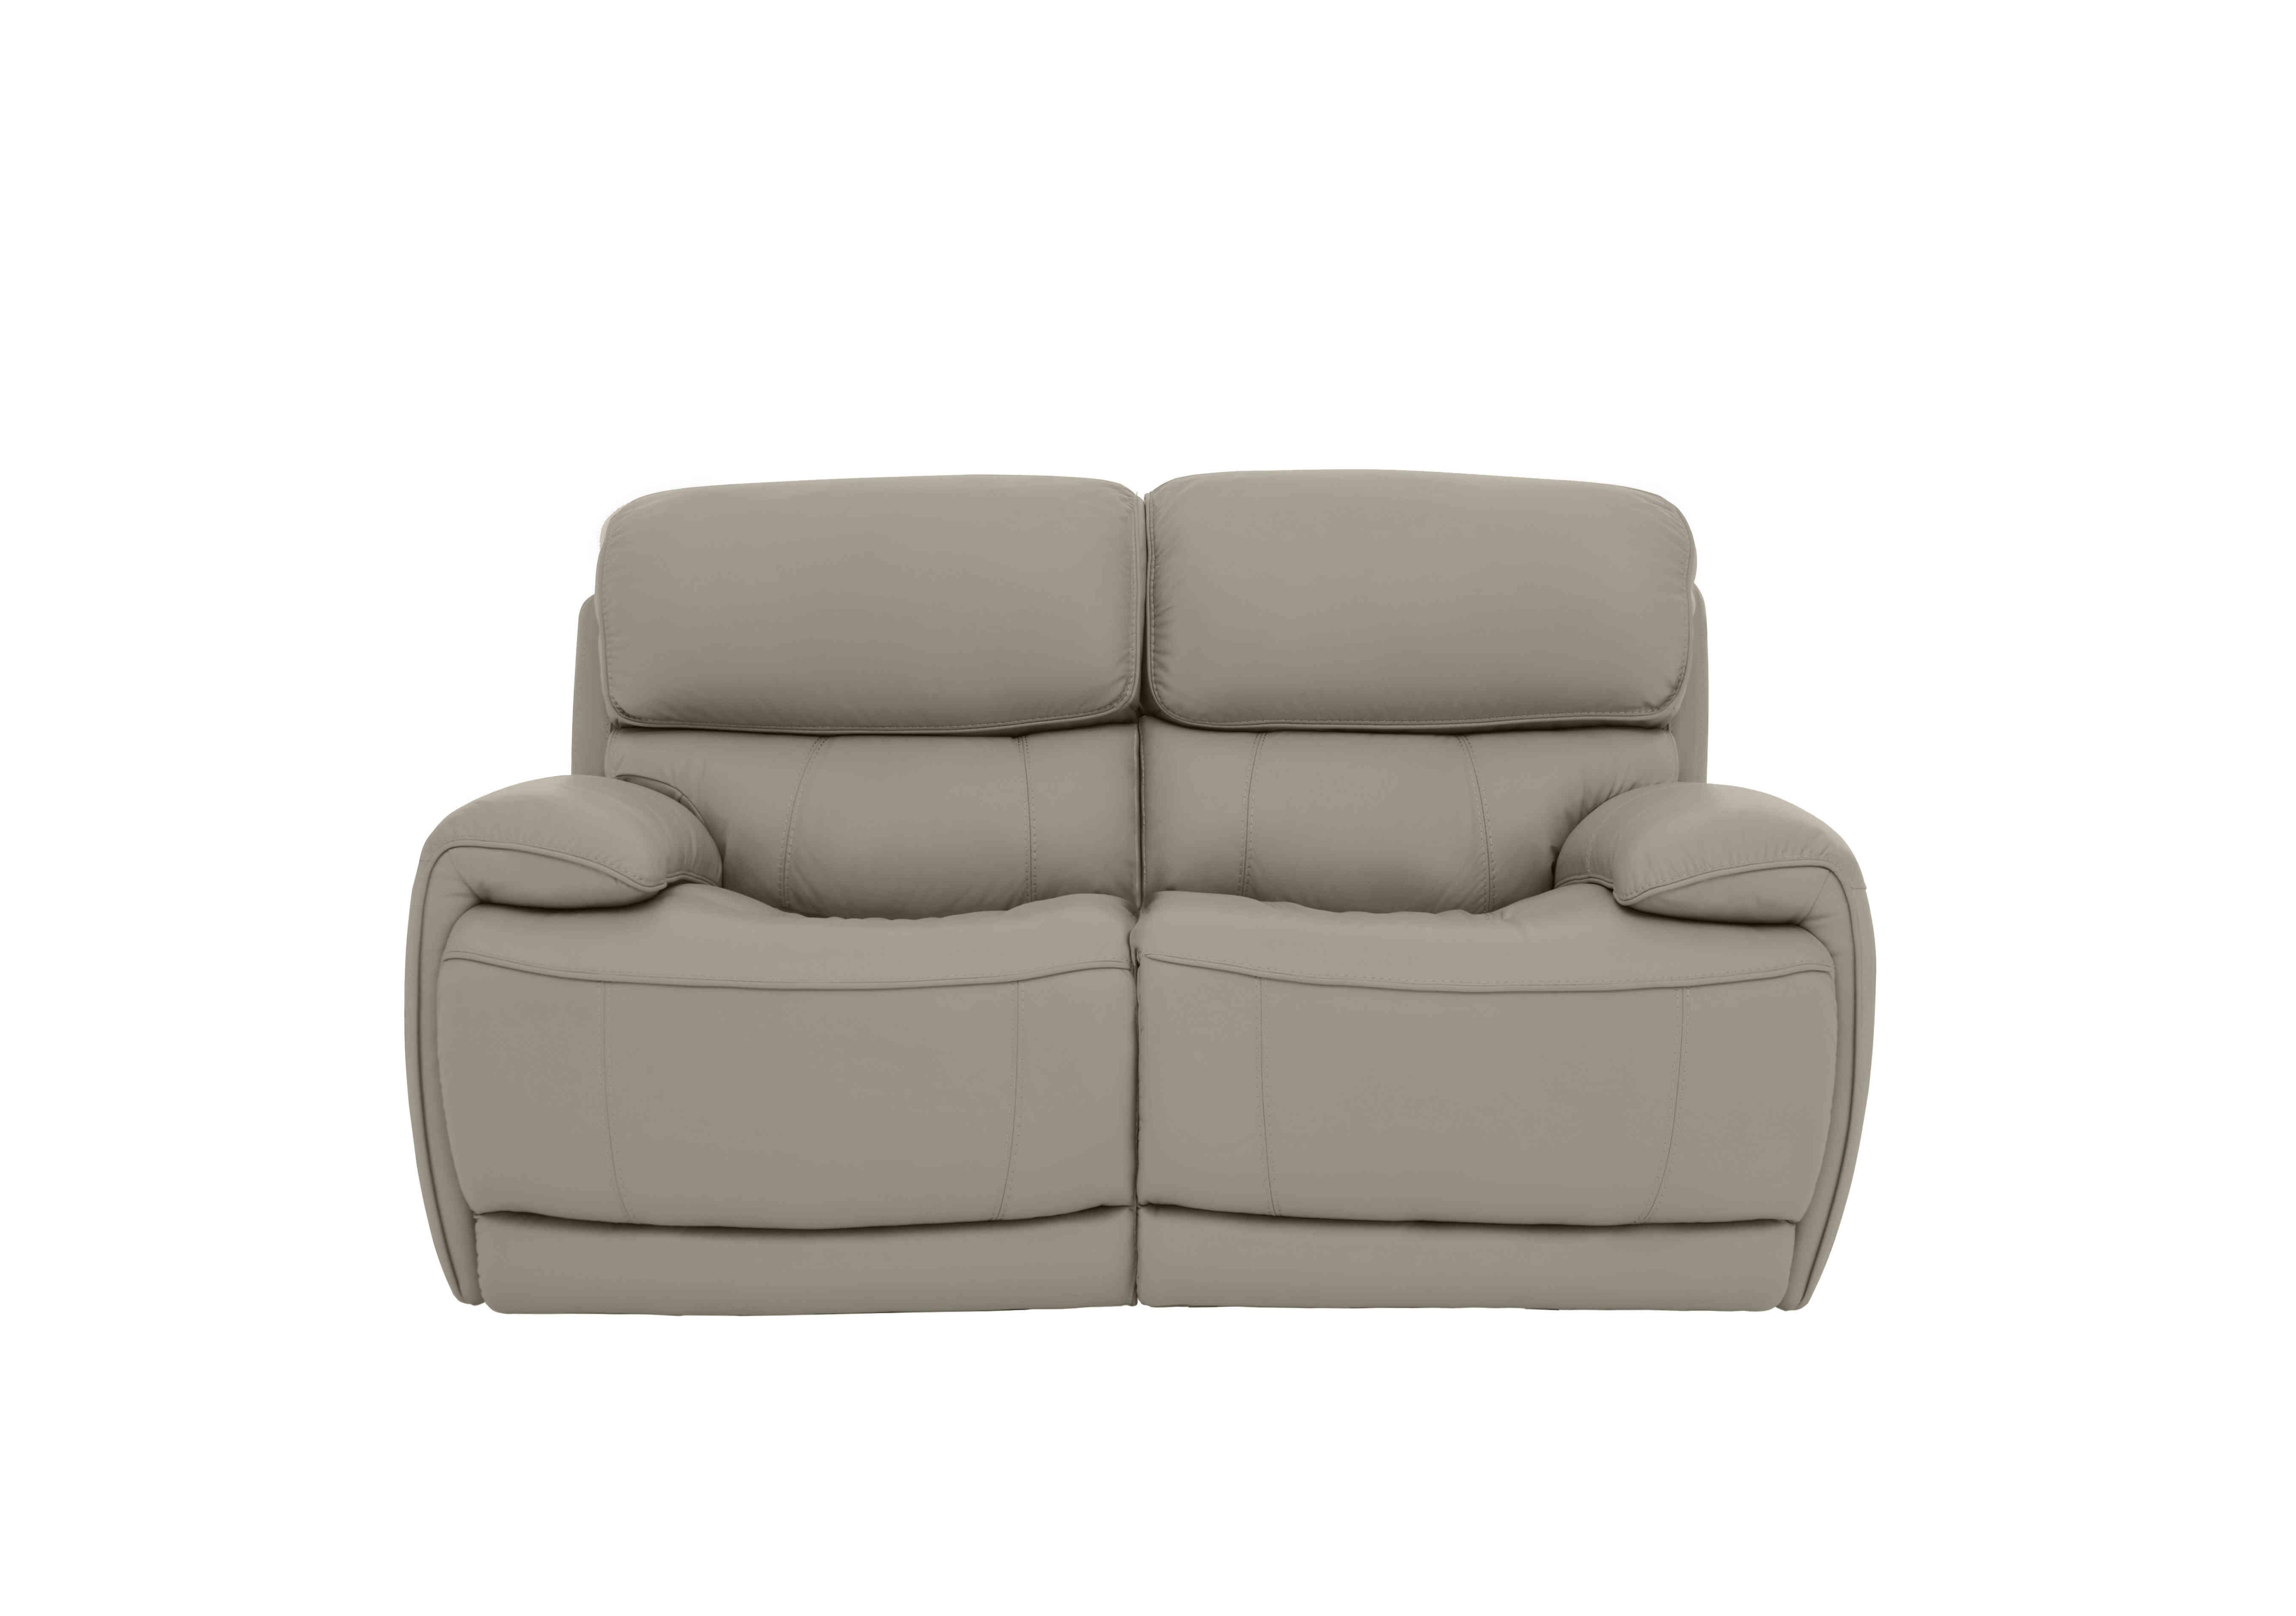 Rocco 2 Seater Leather Power Rocker Sofa with Power Headrests in Bv-946b Silver Grey on Furniture Village